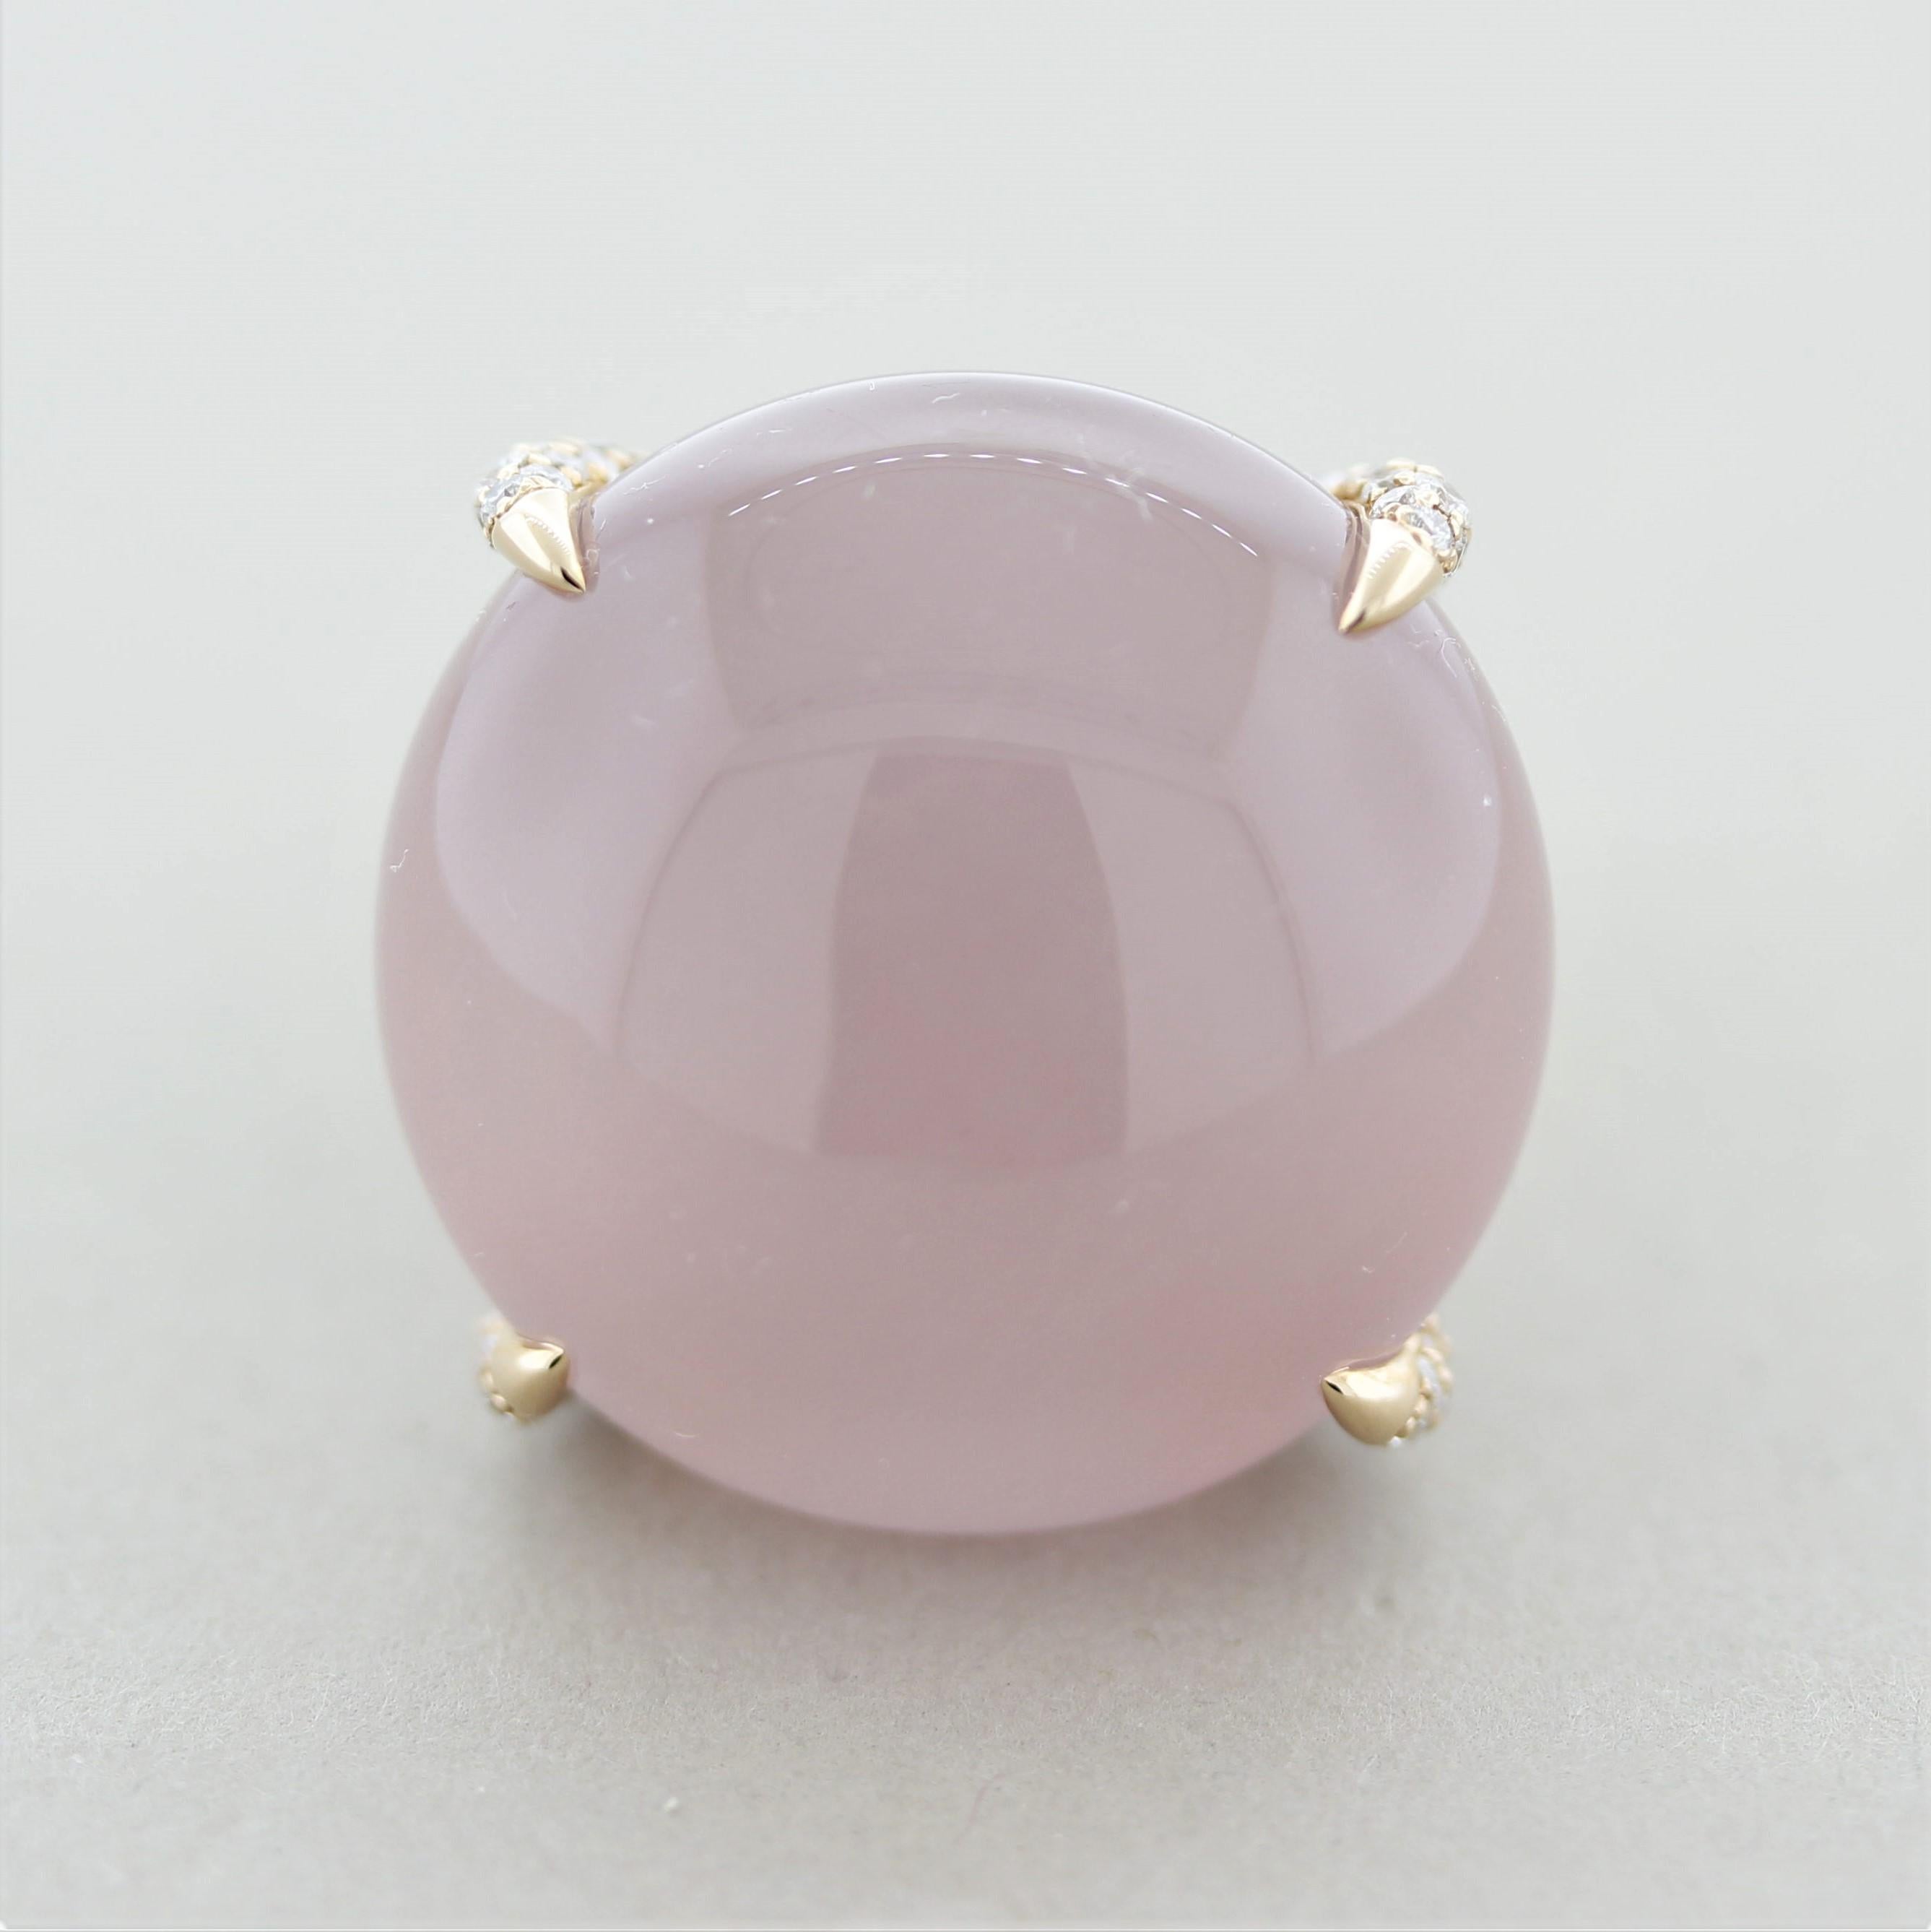 A big, bold, and beautiful cocktail ring featuring a fine cabochon rose quartz weighing 53.70 carats. It has a lively pink color and a smooth polish that brightens the stone. It is set in 4 sleek claw prongs that are set with diamonds on them. The